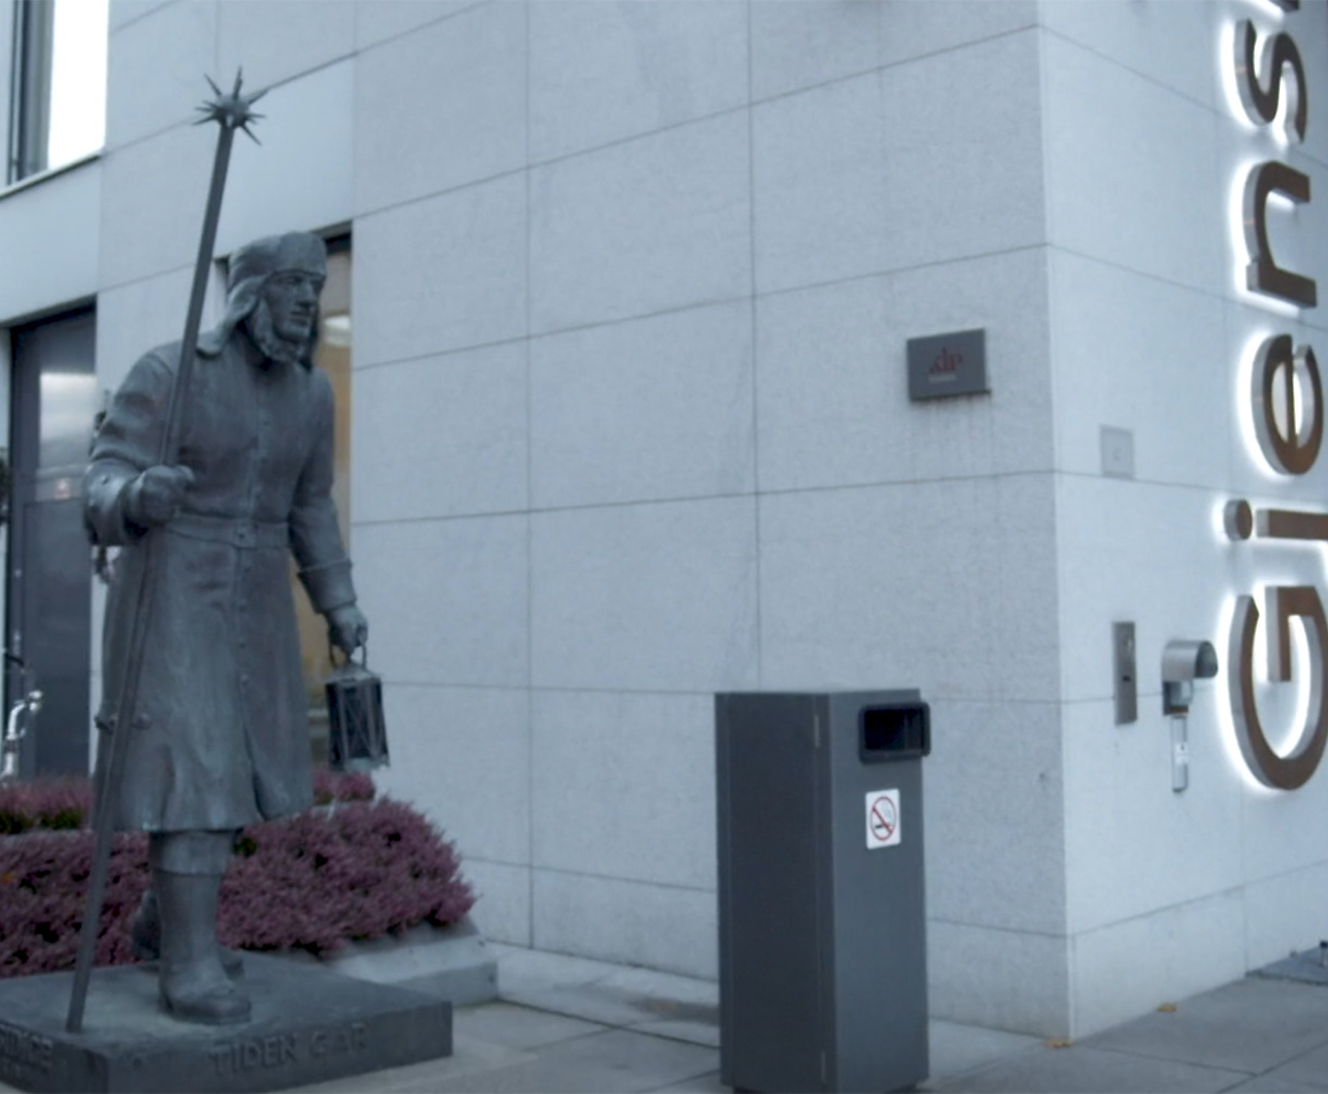 A statue of a person holding a staff near a building where Giensidge is written vertically.